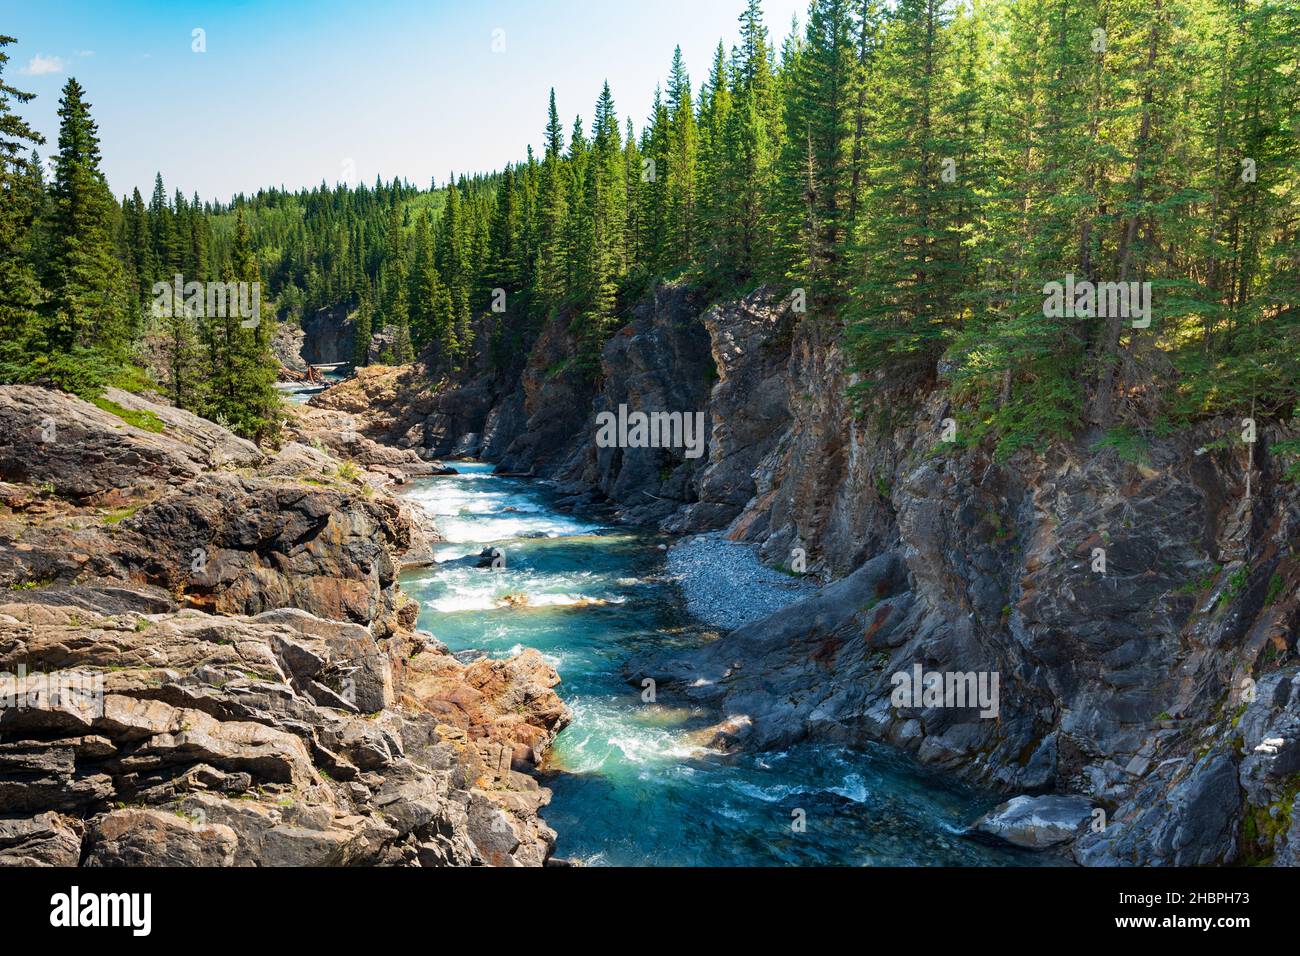 Sheep river in the foothills of the rocky mountains, Alberta, Canada Stock Photo